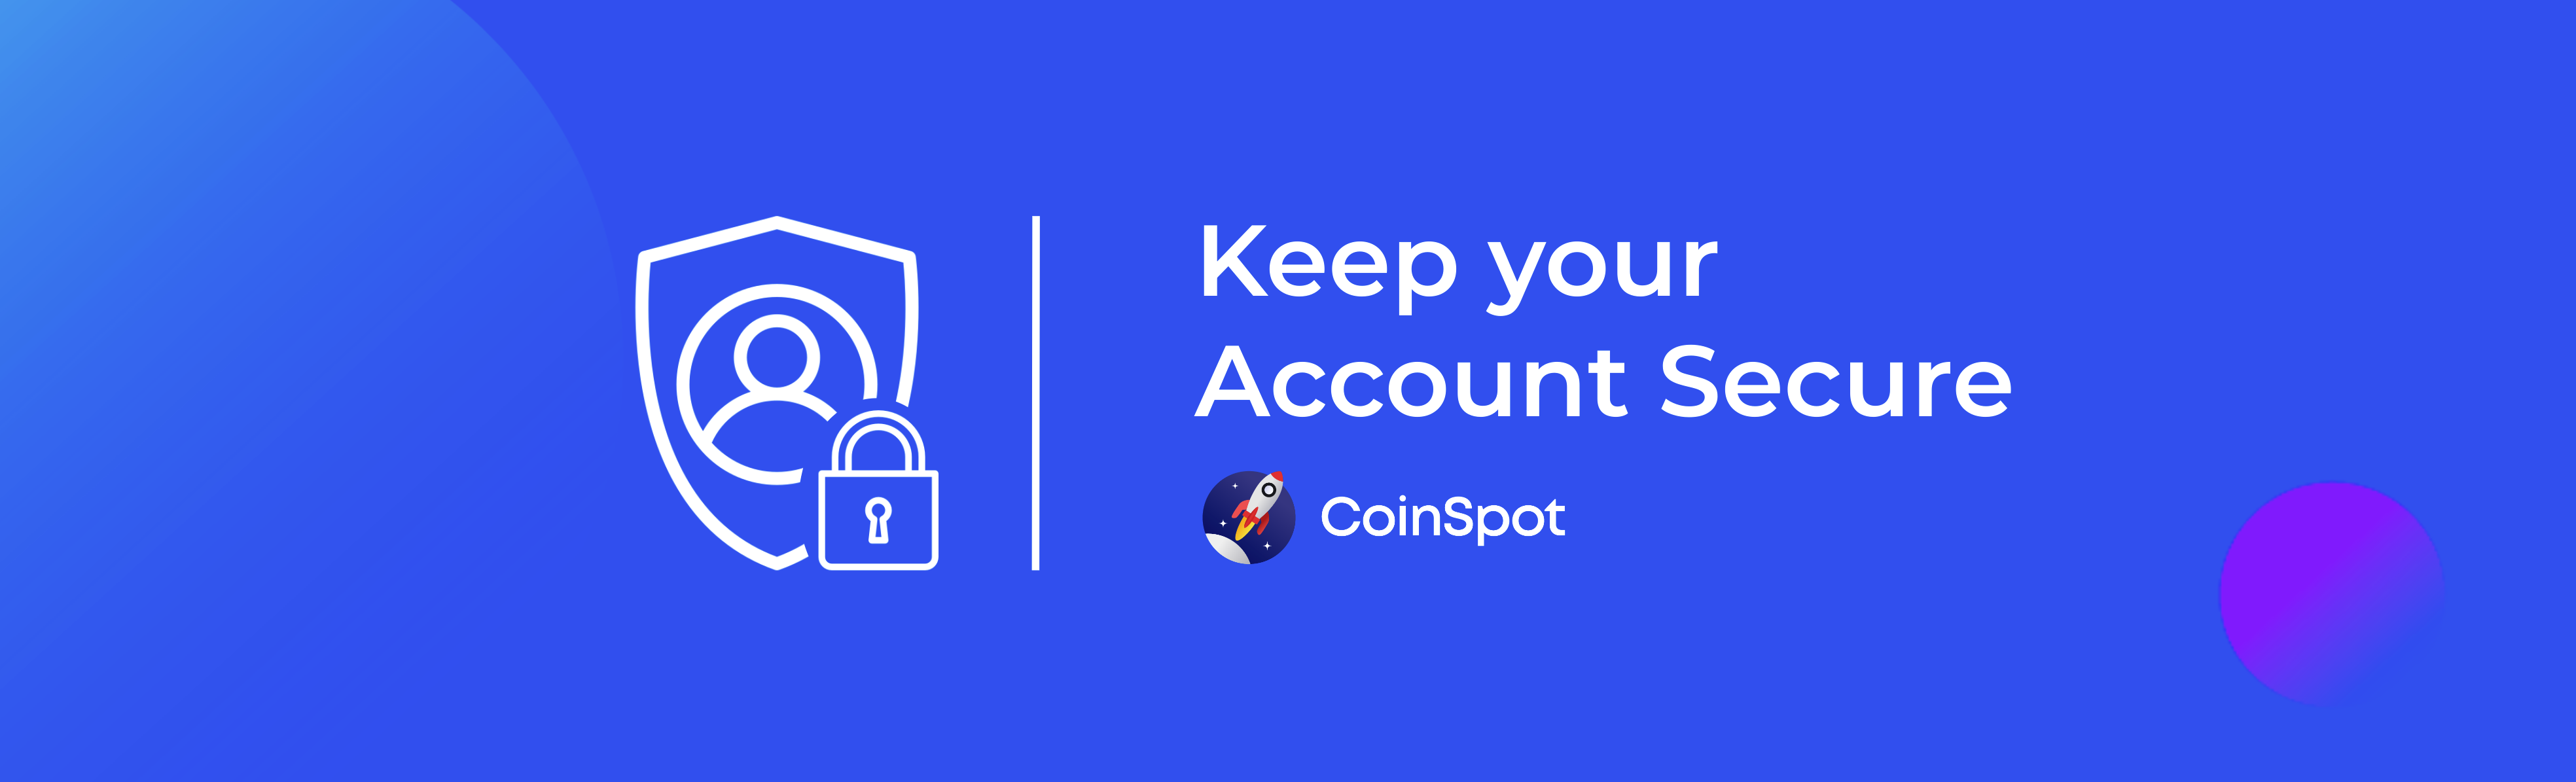 CoinSpot - Keep your account secure.png